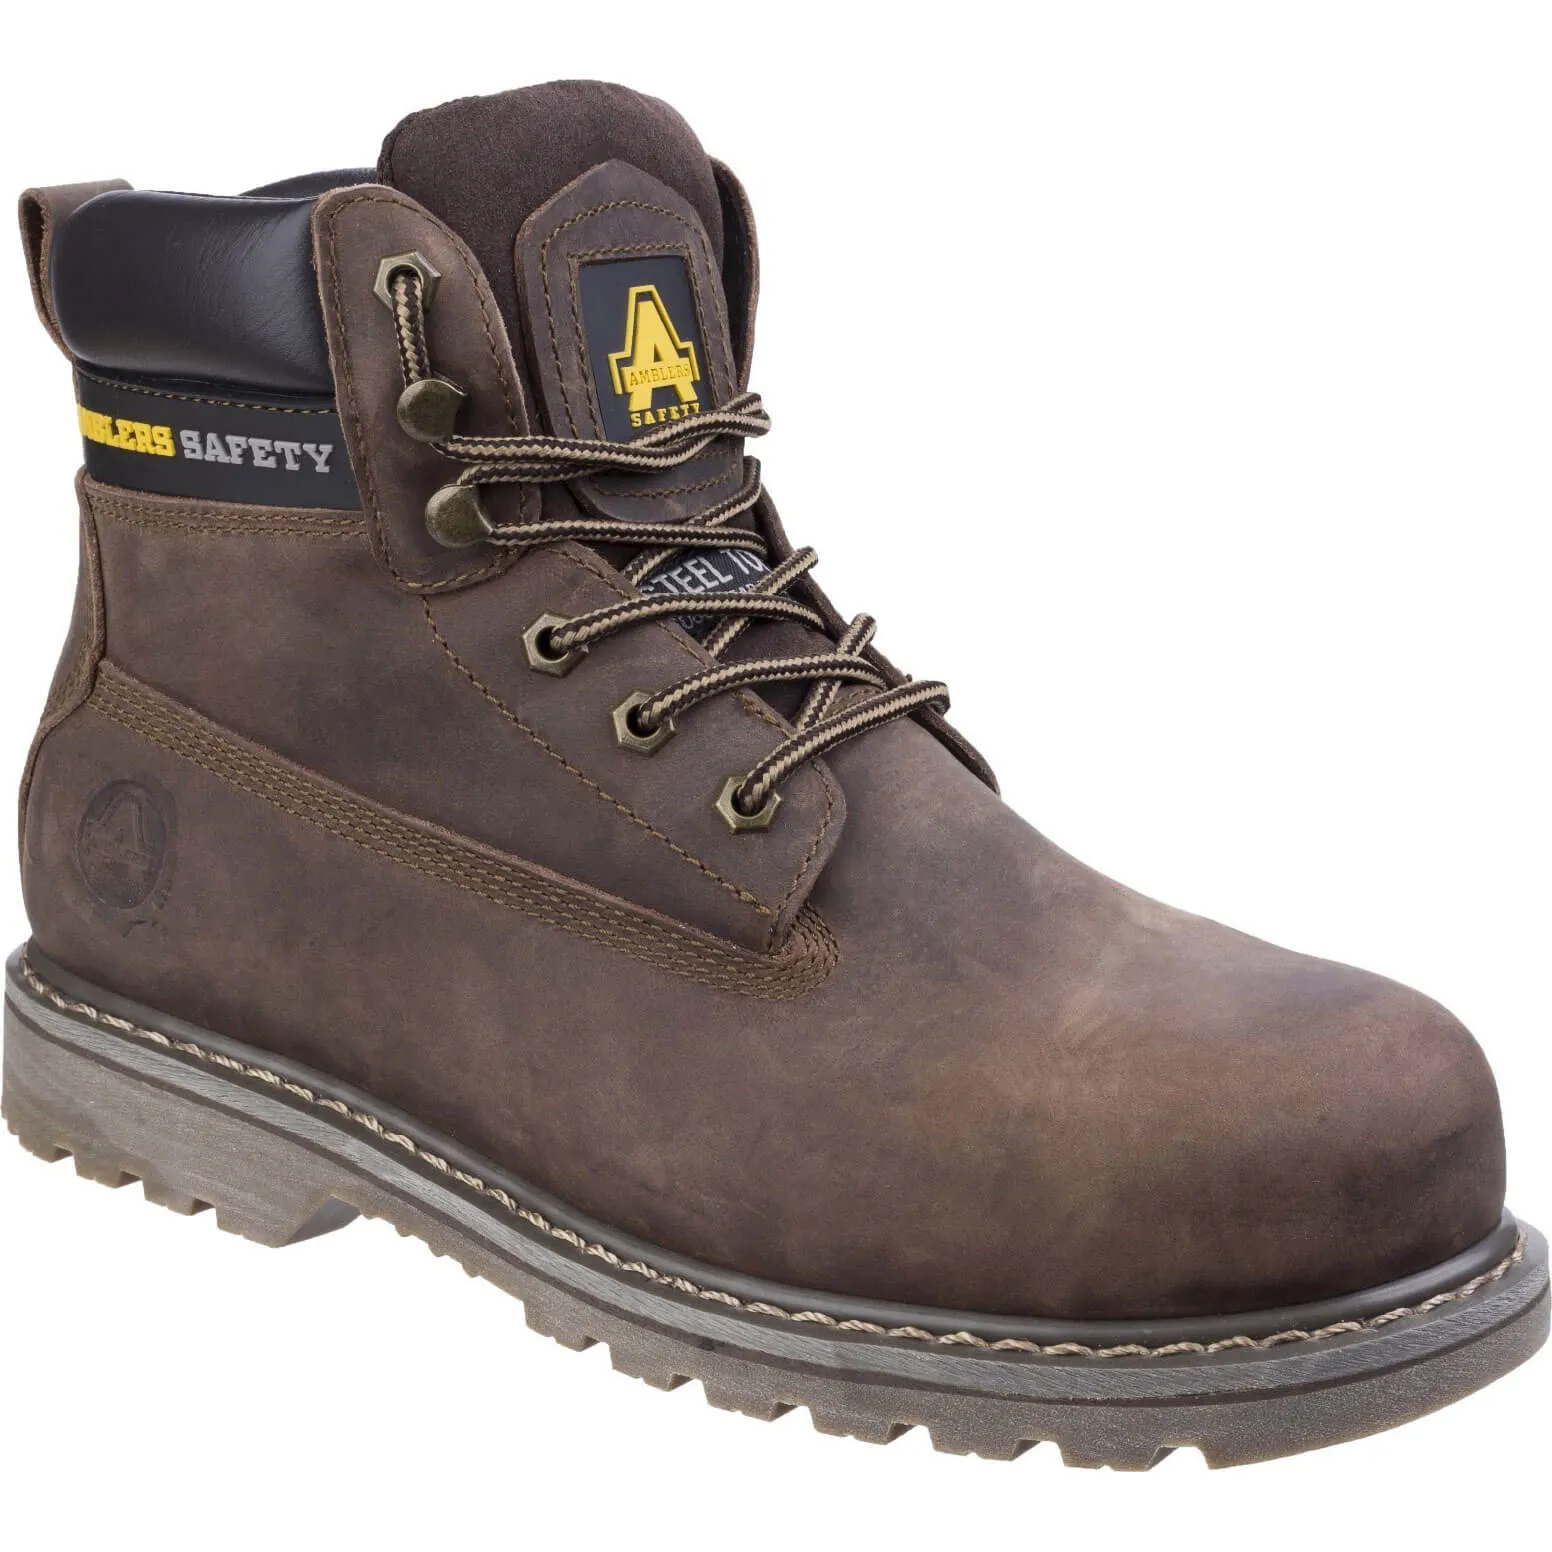 Amblers Safety FS164 Goodyear Welted Industrial Safety Boot - Brown, Size 7